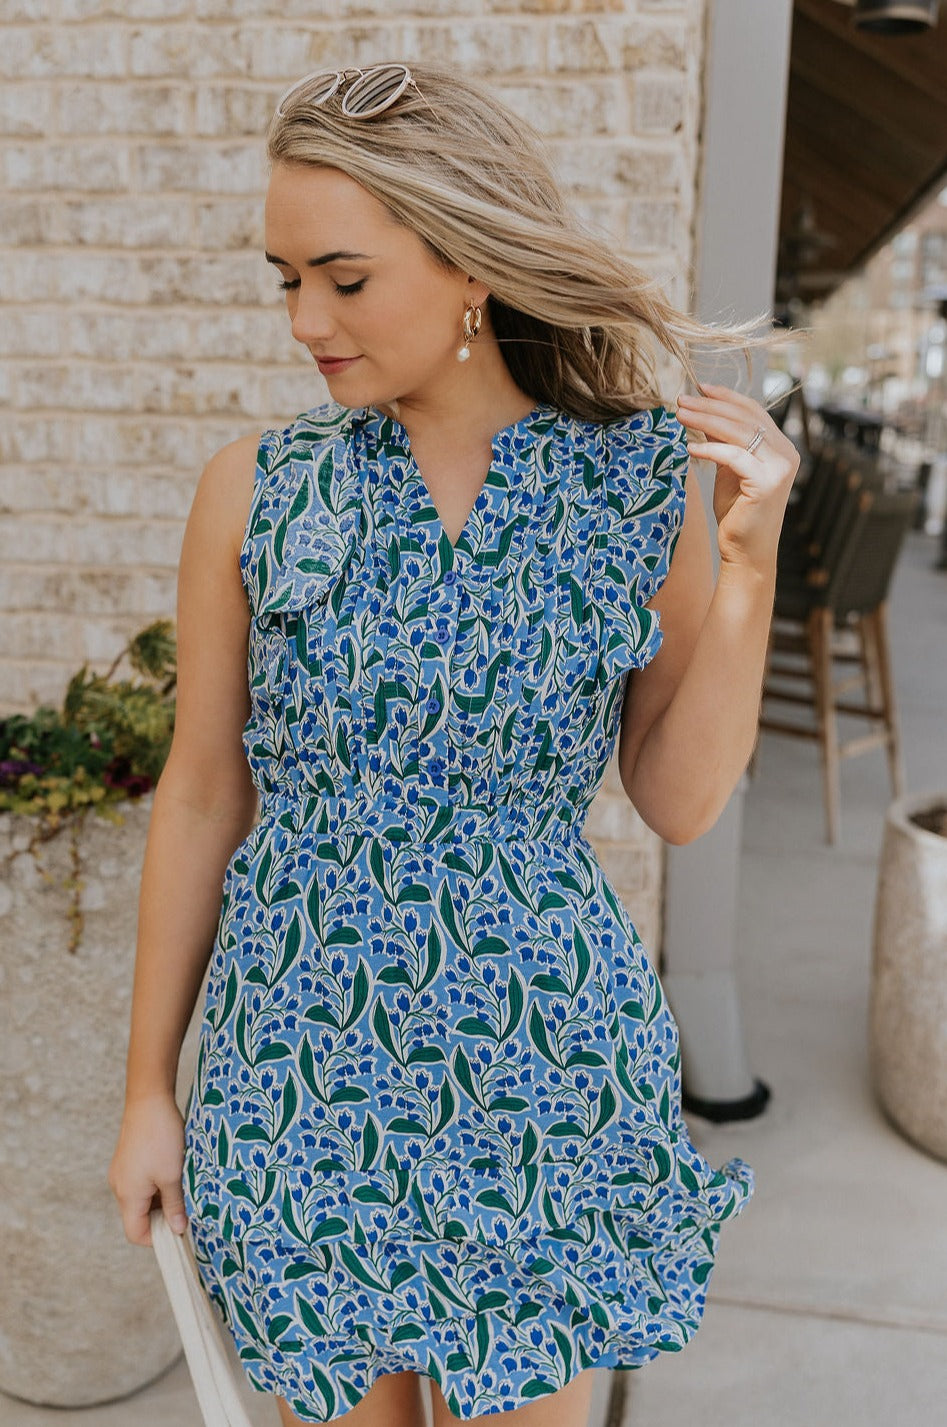 Front view of female model wearing the June Blue & Green Floral Ruffle Mini Dress which features Blue and Green Floral Print, Ruffle Tiered Design, Mini Length, High Neck with V-Cutout and Sleeveless